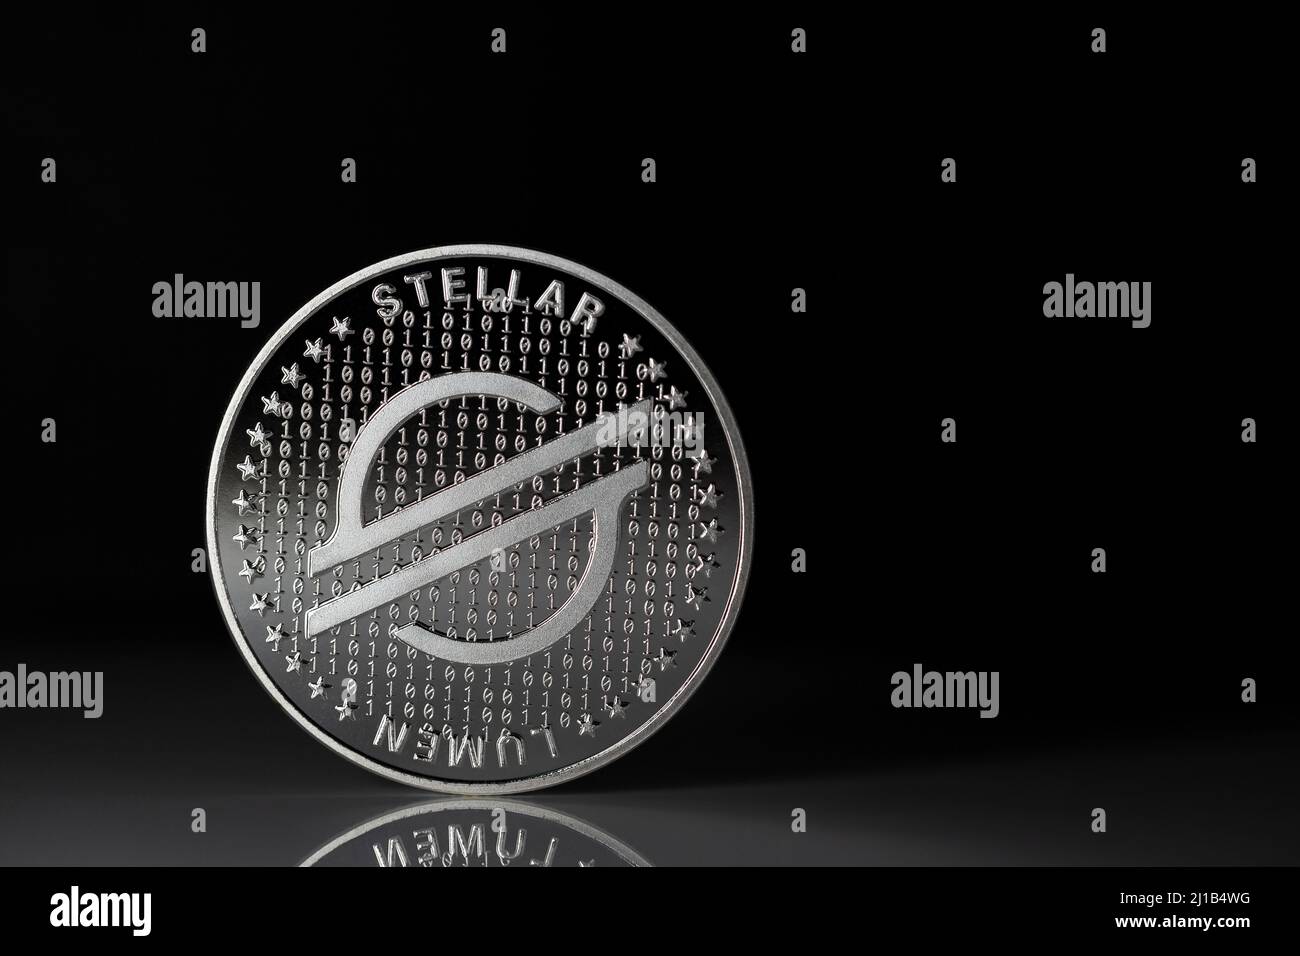 Stellar XLM cryptocurrency physical coin placed on reflective surface and black background Stock Photo